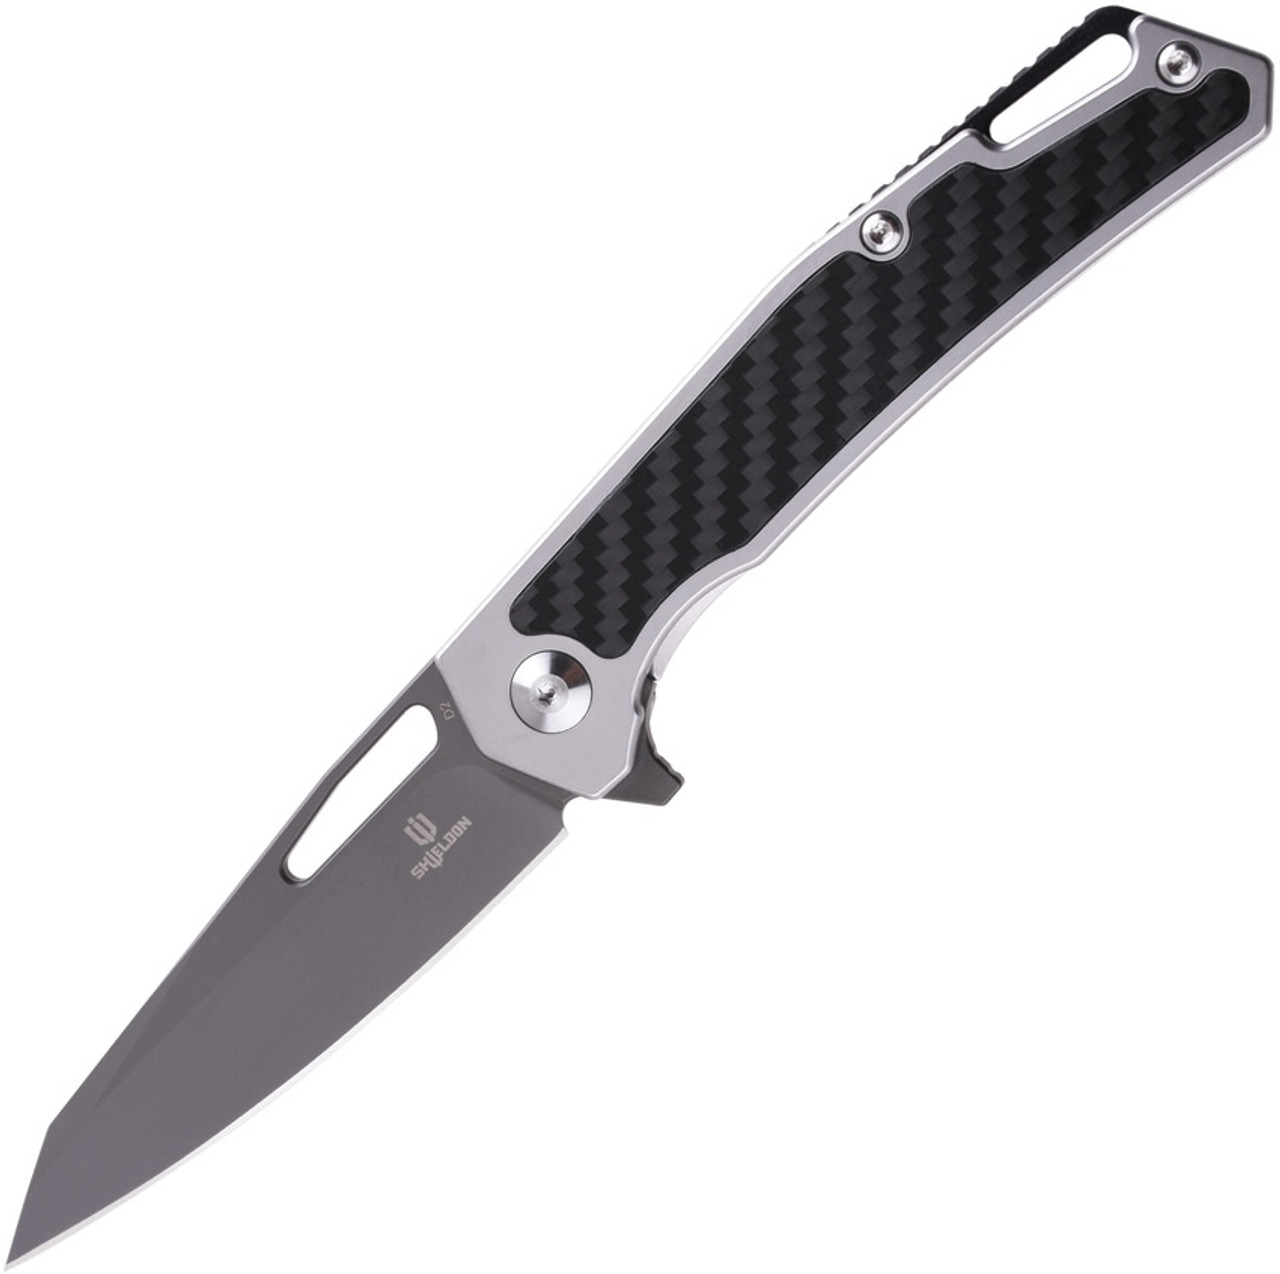 Shieldon Barraskewda Folding Knife (604S1-G) 3.74 in Grey D2 Reverse Tanto Point Blade, Gray Stainless Steel with Carbon Fiber Inlay Handle